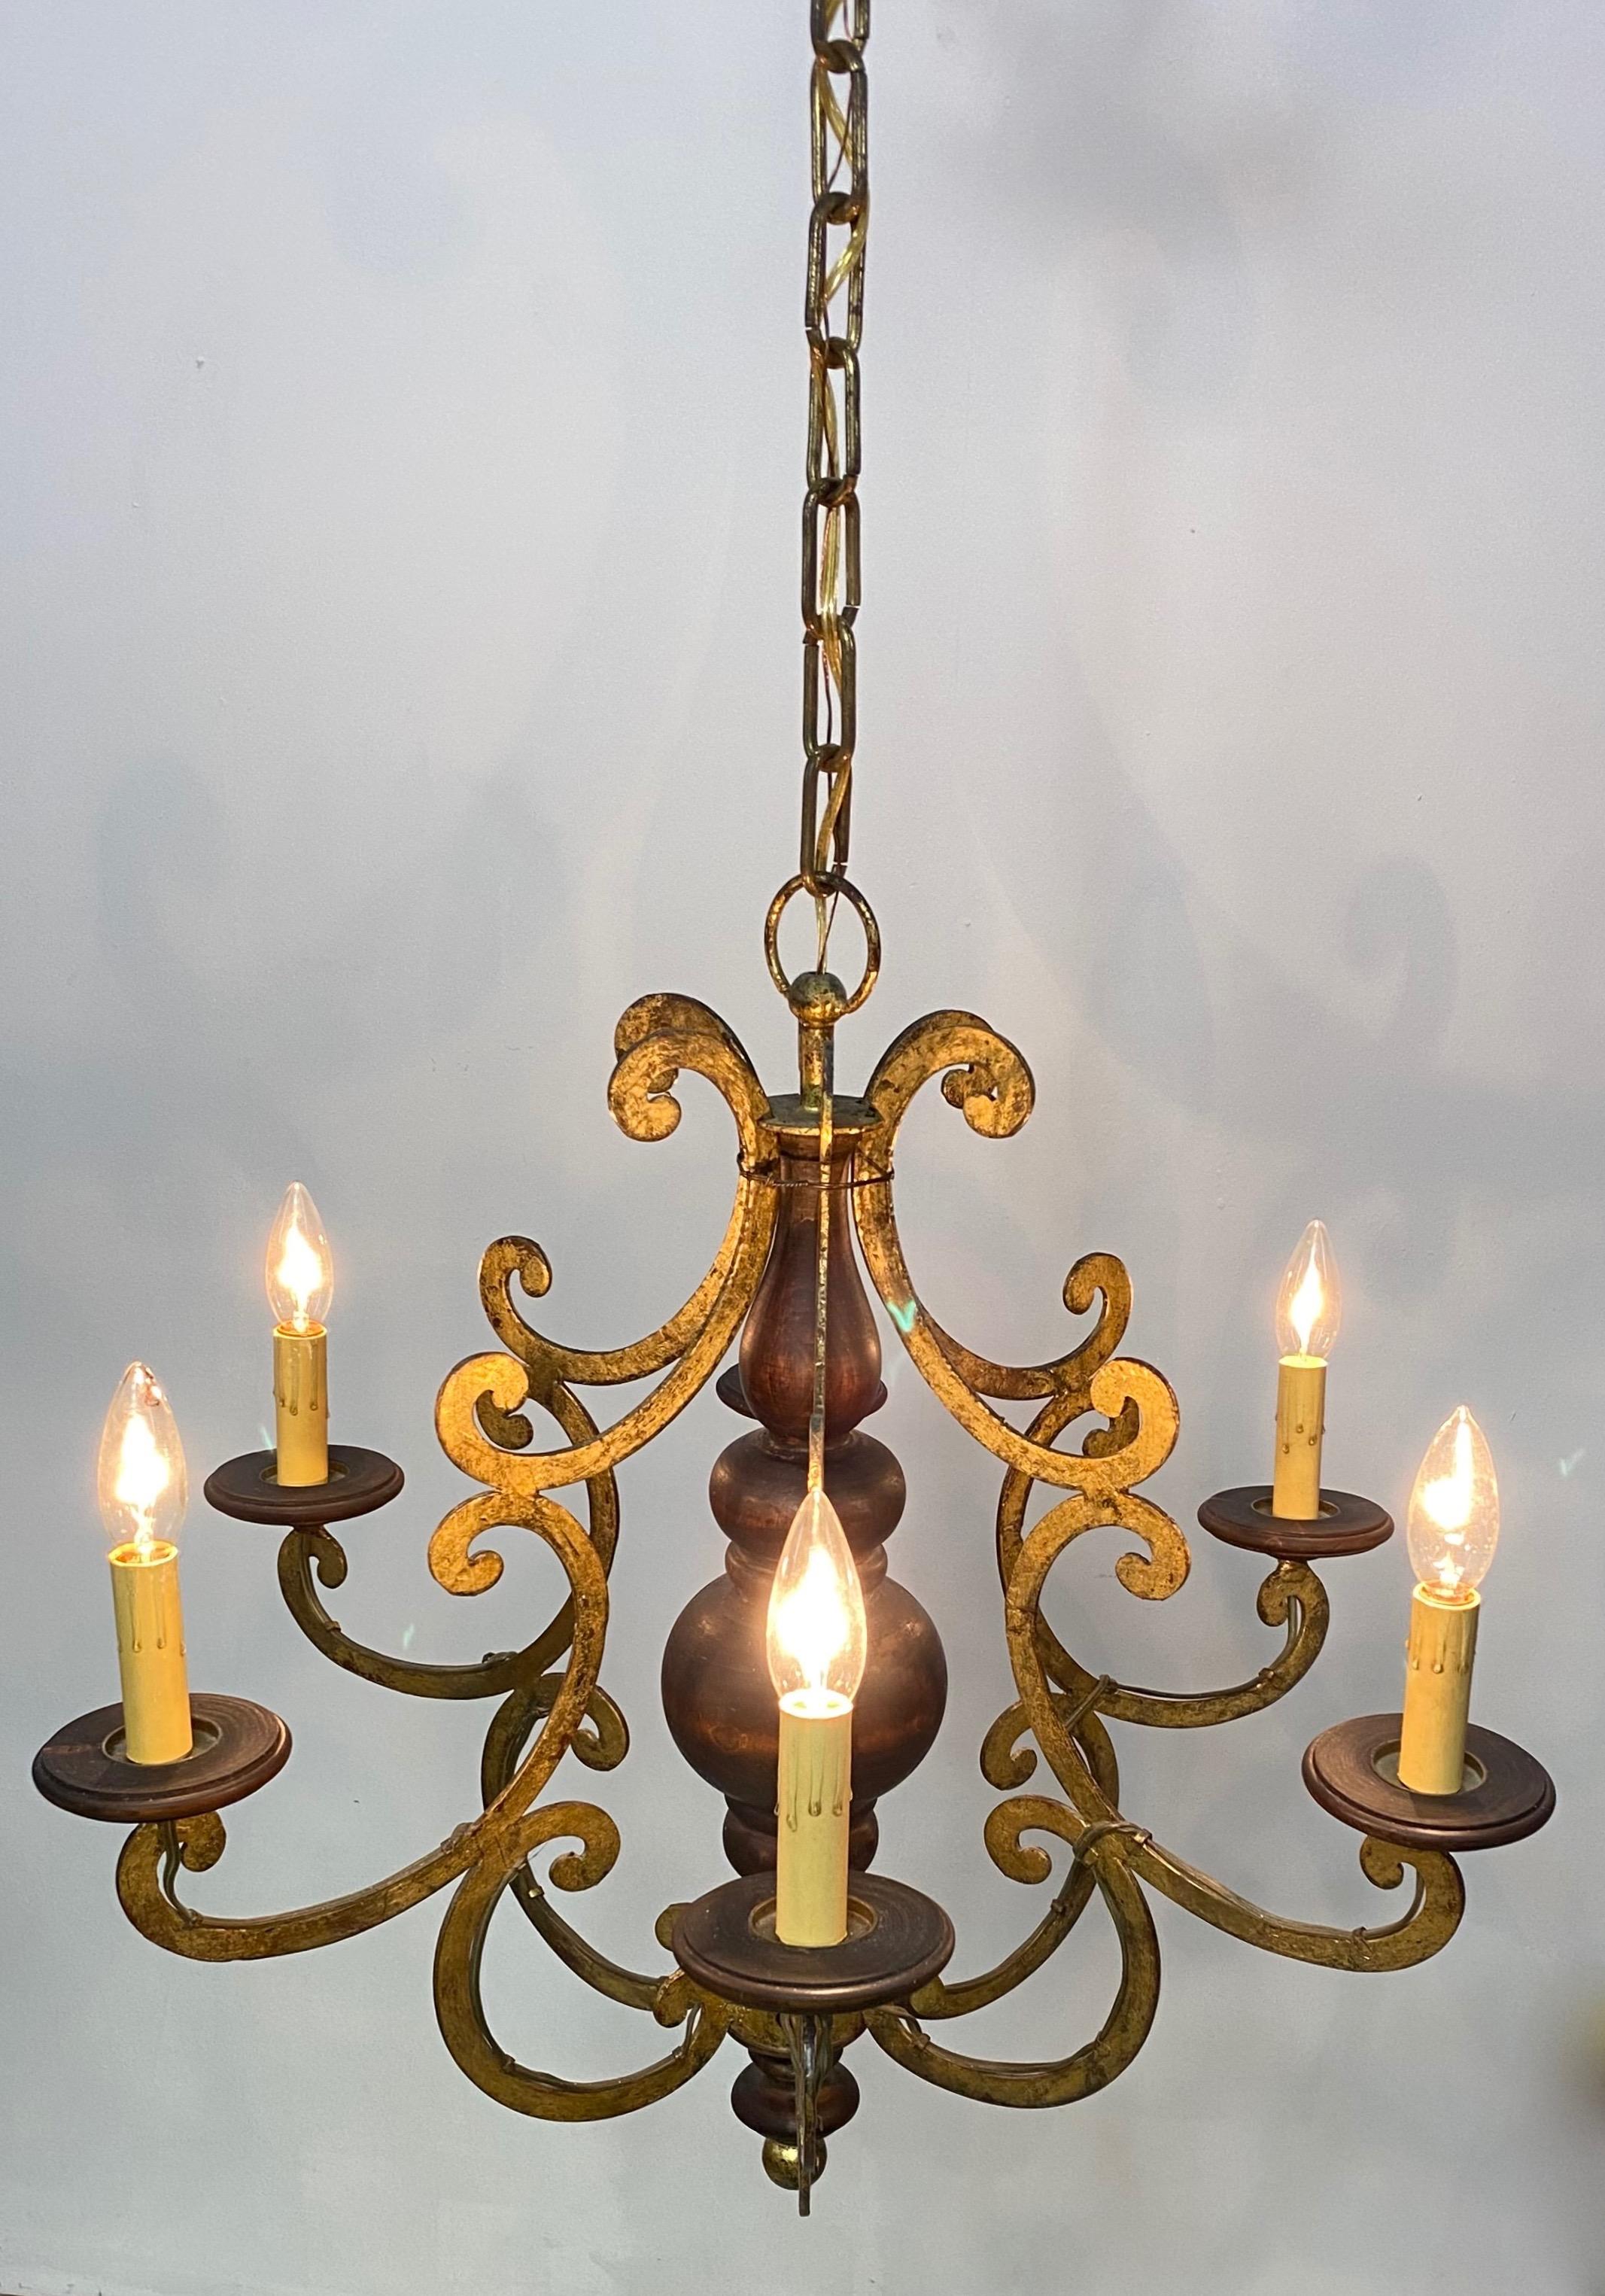 Italian Walnut and Wrought Iron Light Fixture, 1960's For Sale 2